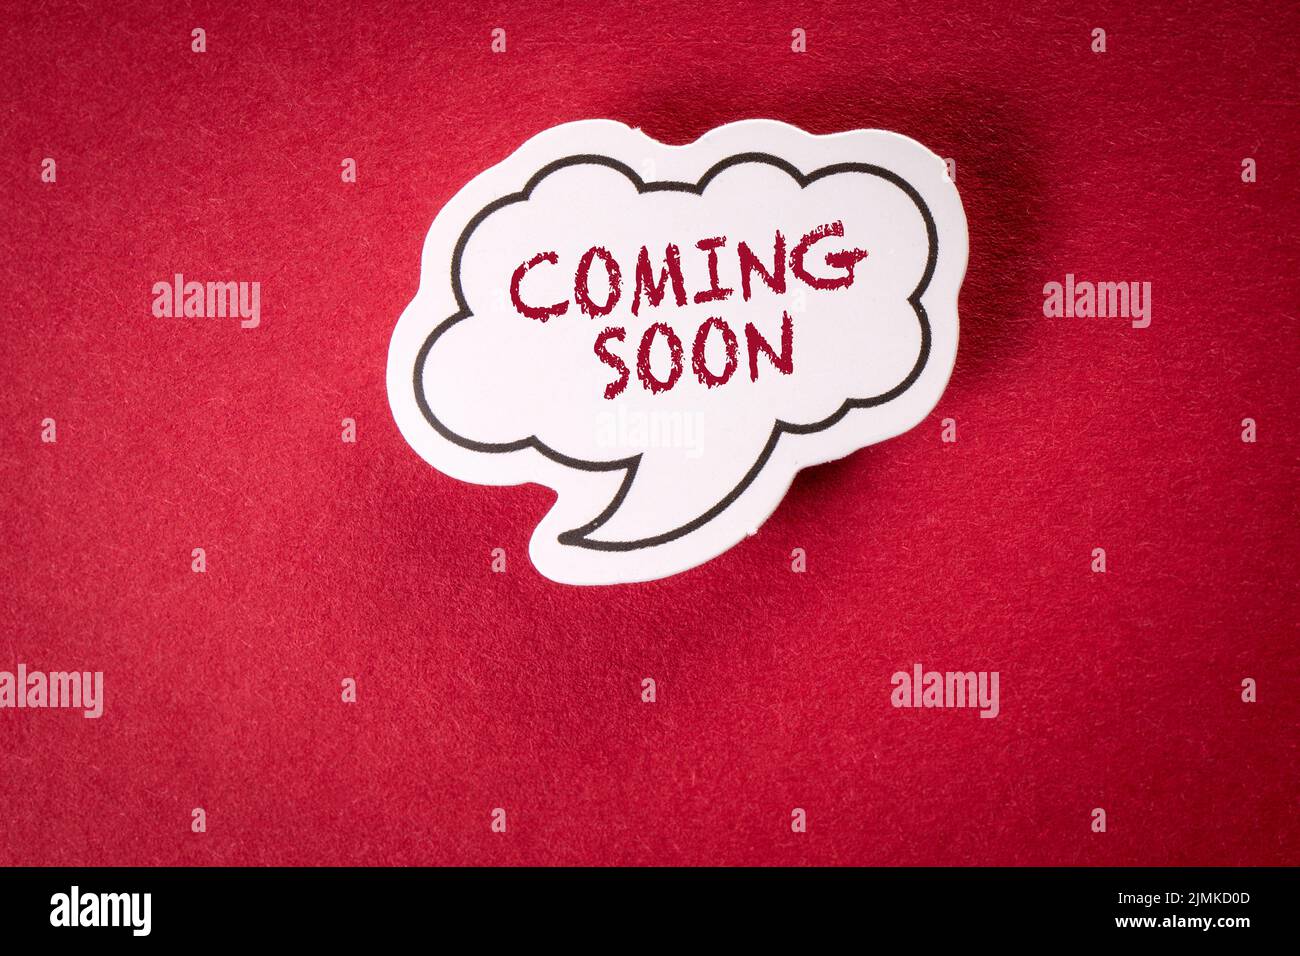 Coming Soon. White speech bubble on red background. Stock Photo